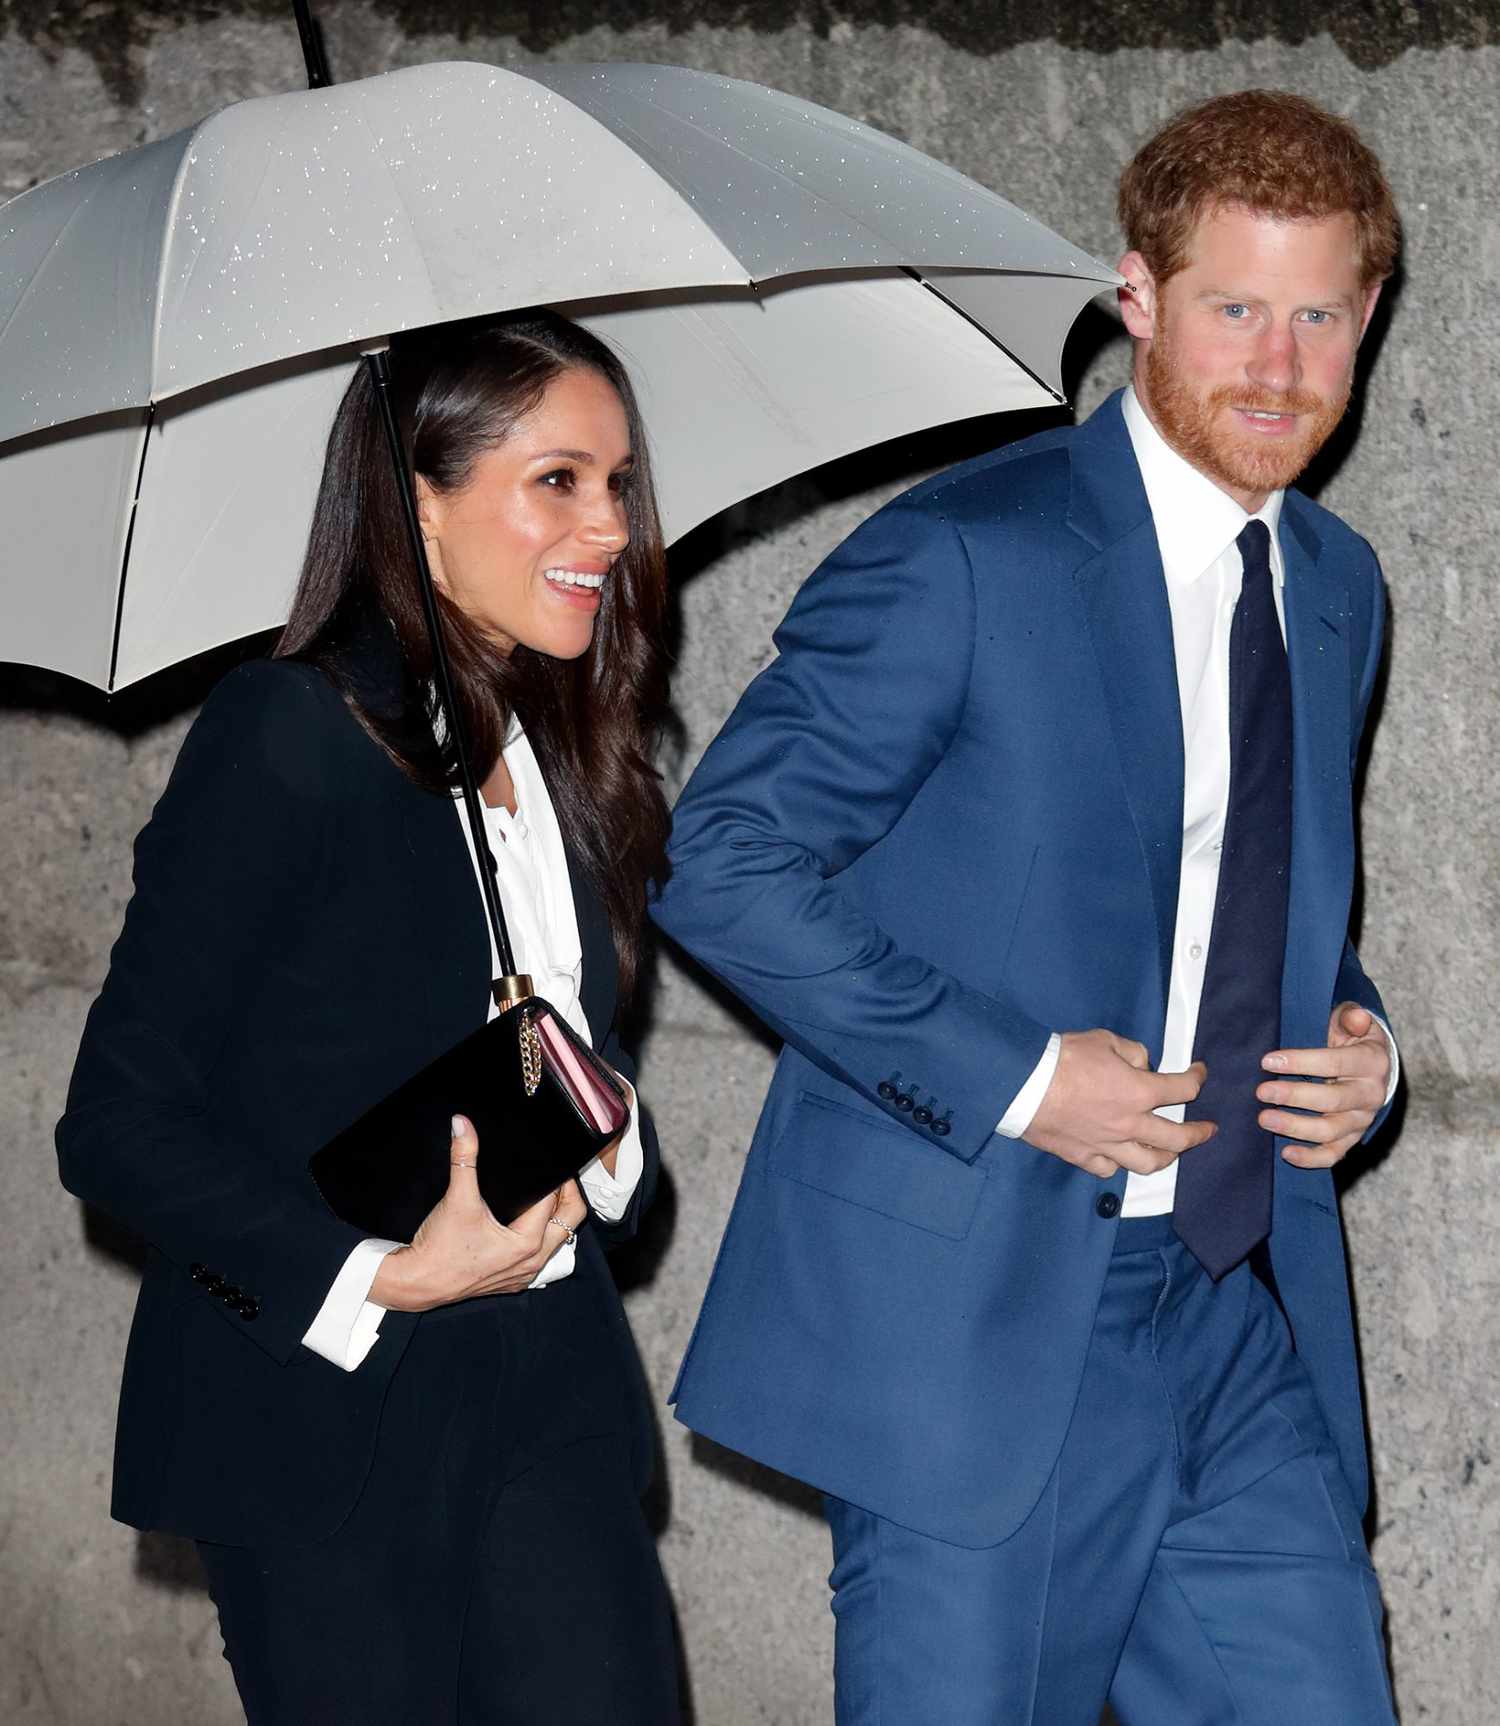 Meghan Markle and Prince Harry with Umbrella